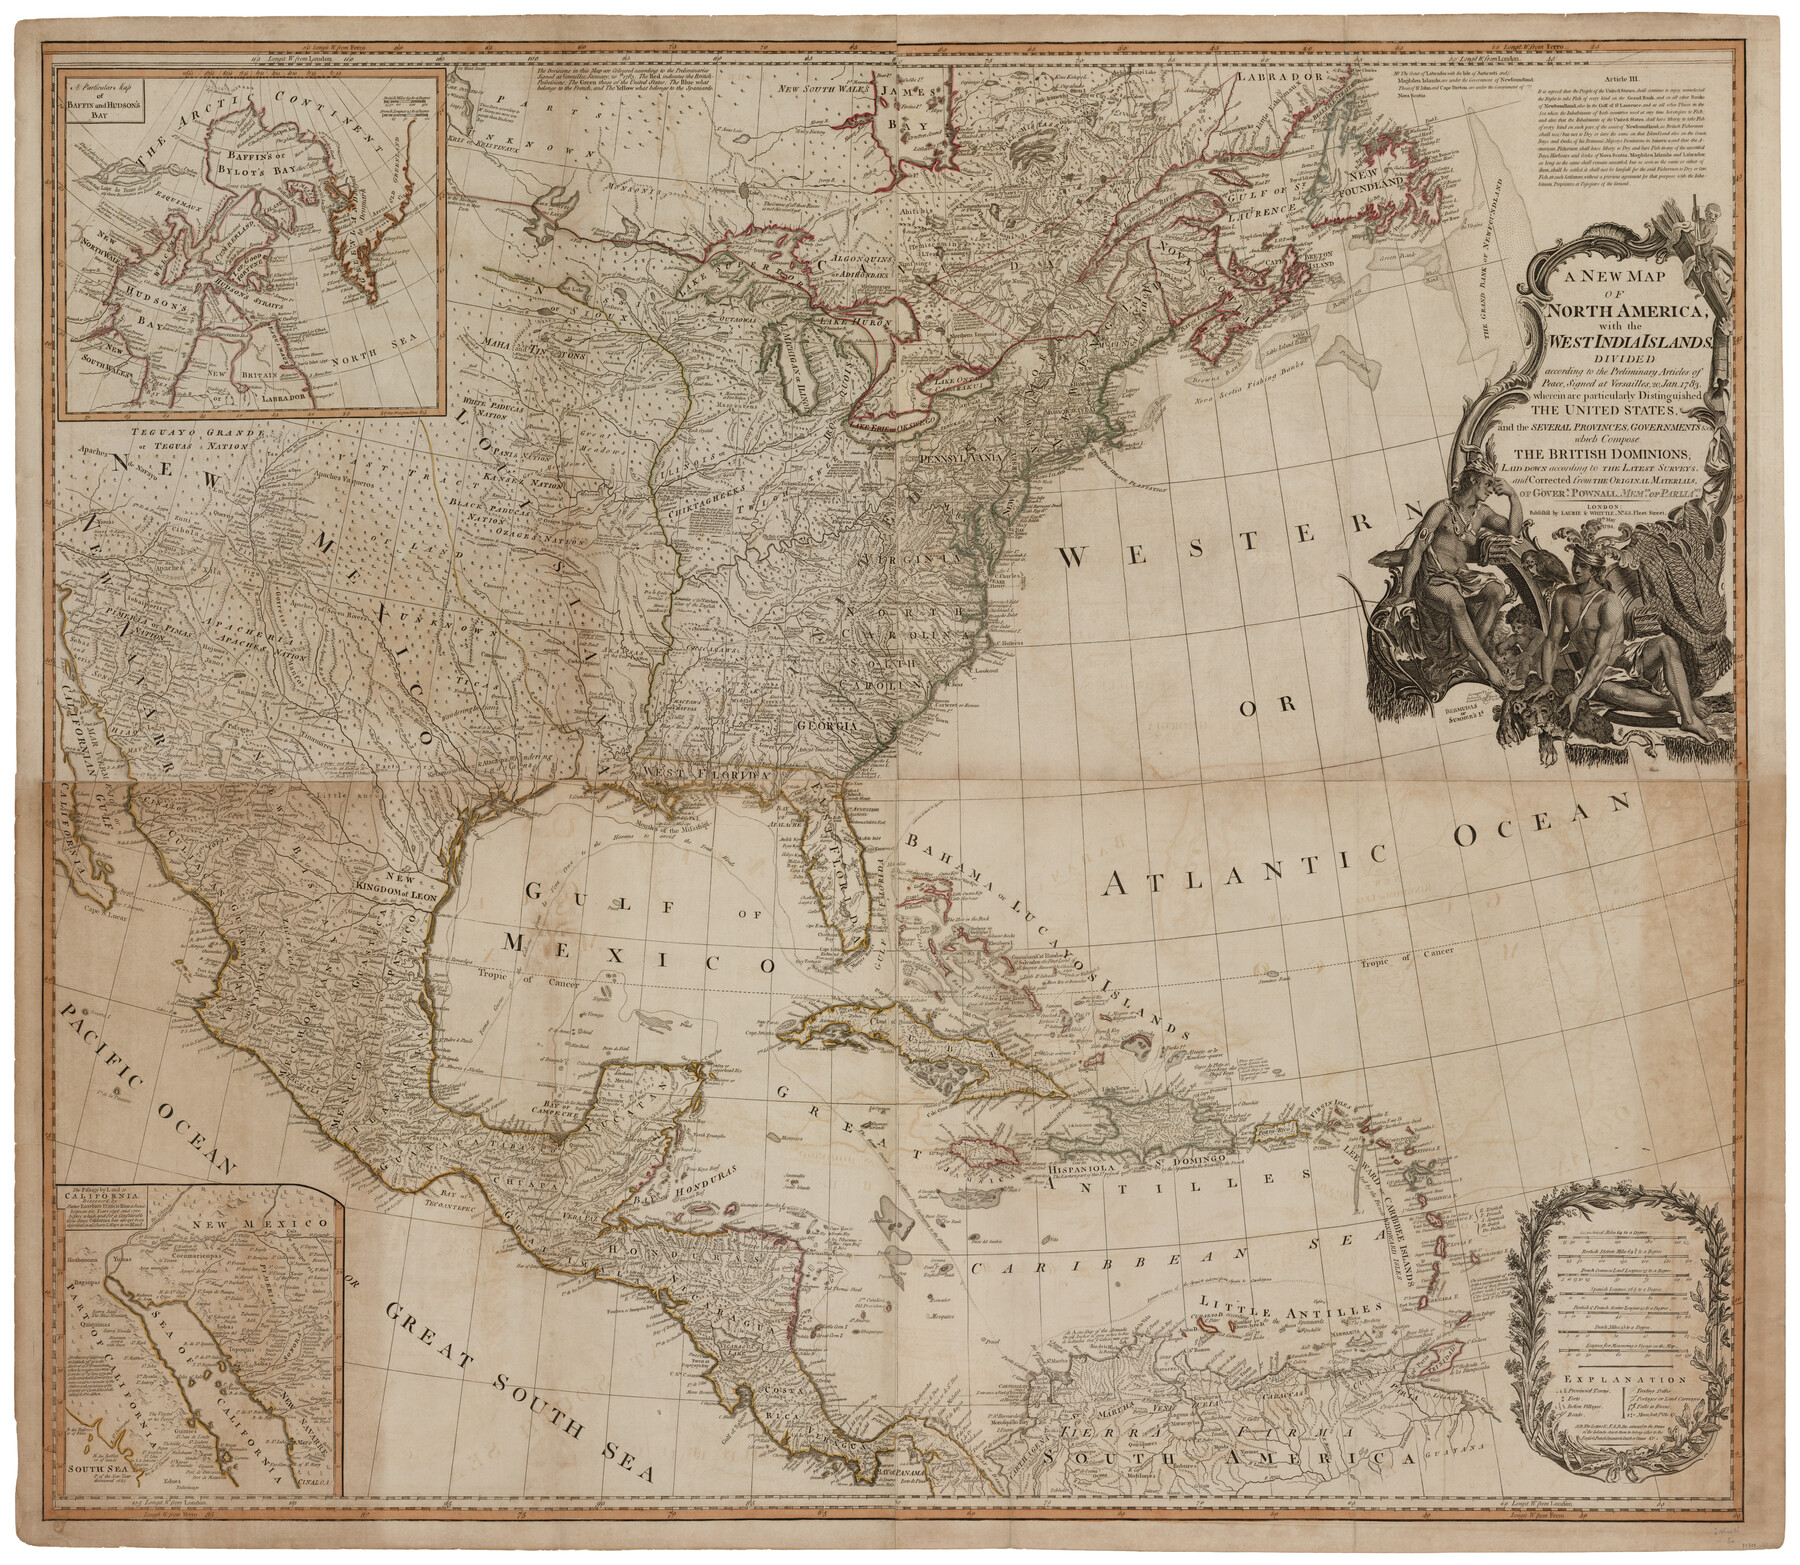 93734, A New Map of North America with the West India Islands divided according to the preliminary Articles of Peace, signed at Versailles, 20 Jan. 1783, General Map Collection